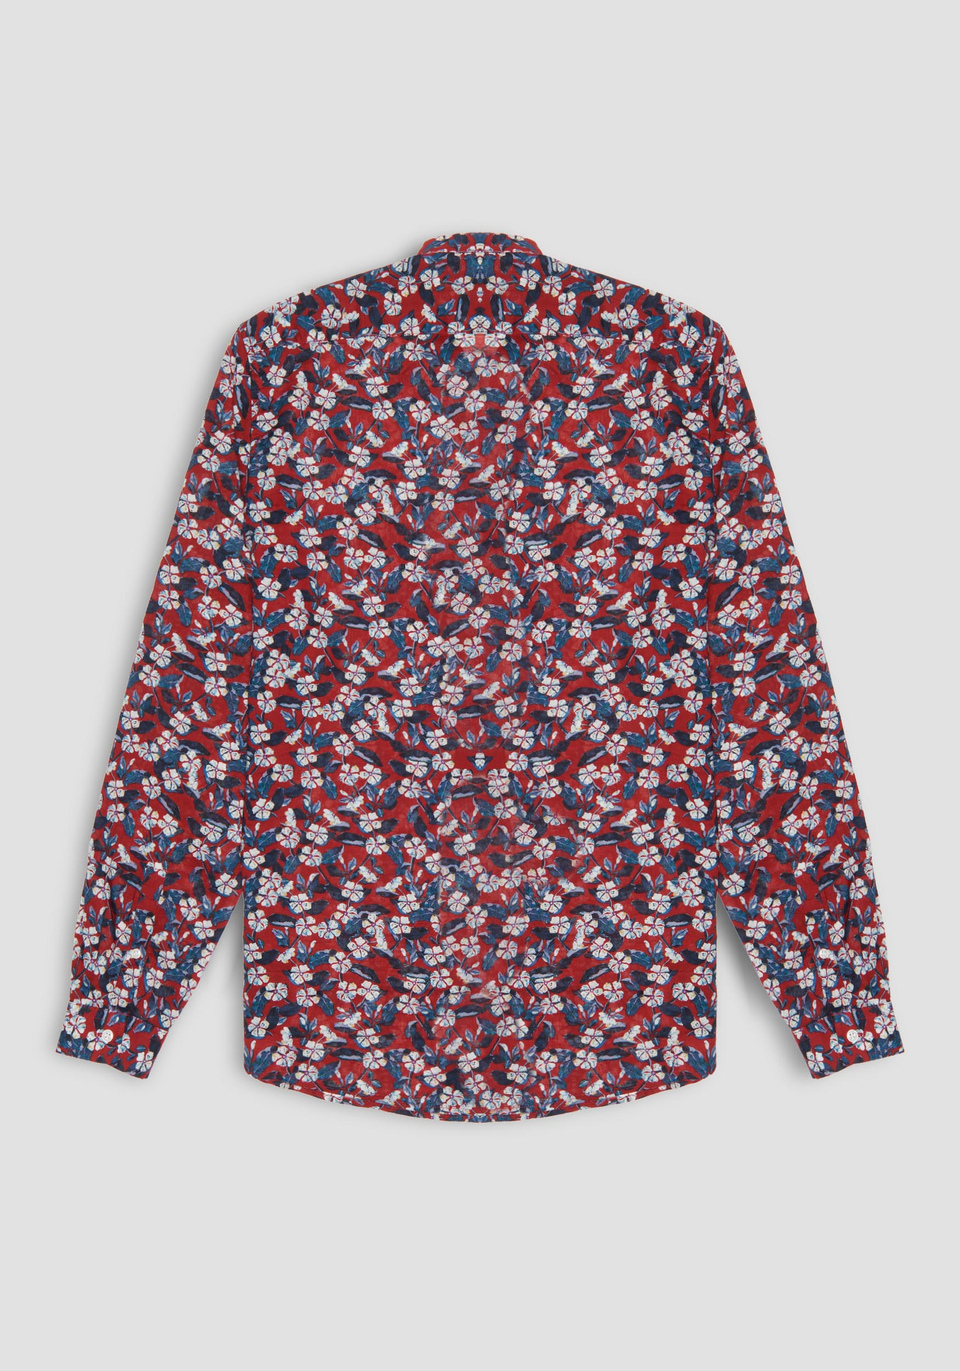 SLIM-FIT “SEOUL” SHIRT IN 100% COTTON WITH A FLORAL PRINT PATTERN - Antony Morato Online Shop